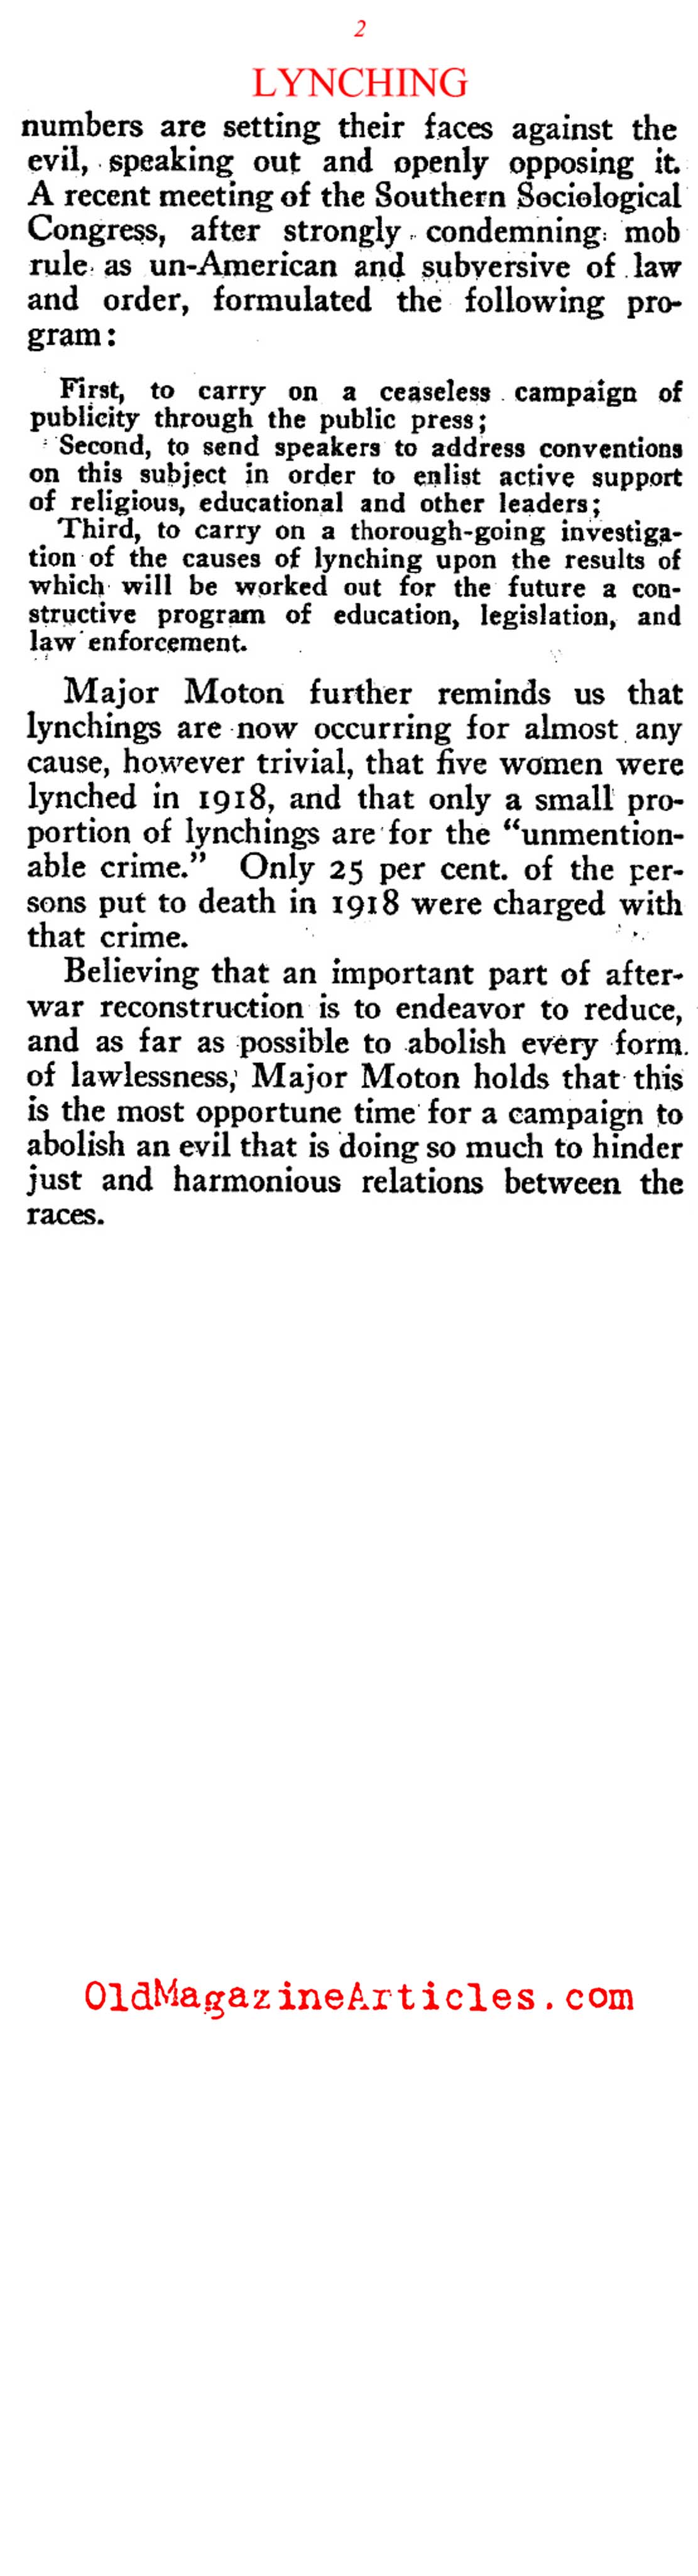 The Lynching Evil as Understood by Robert Moton (Review of Reviews, 1919)